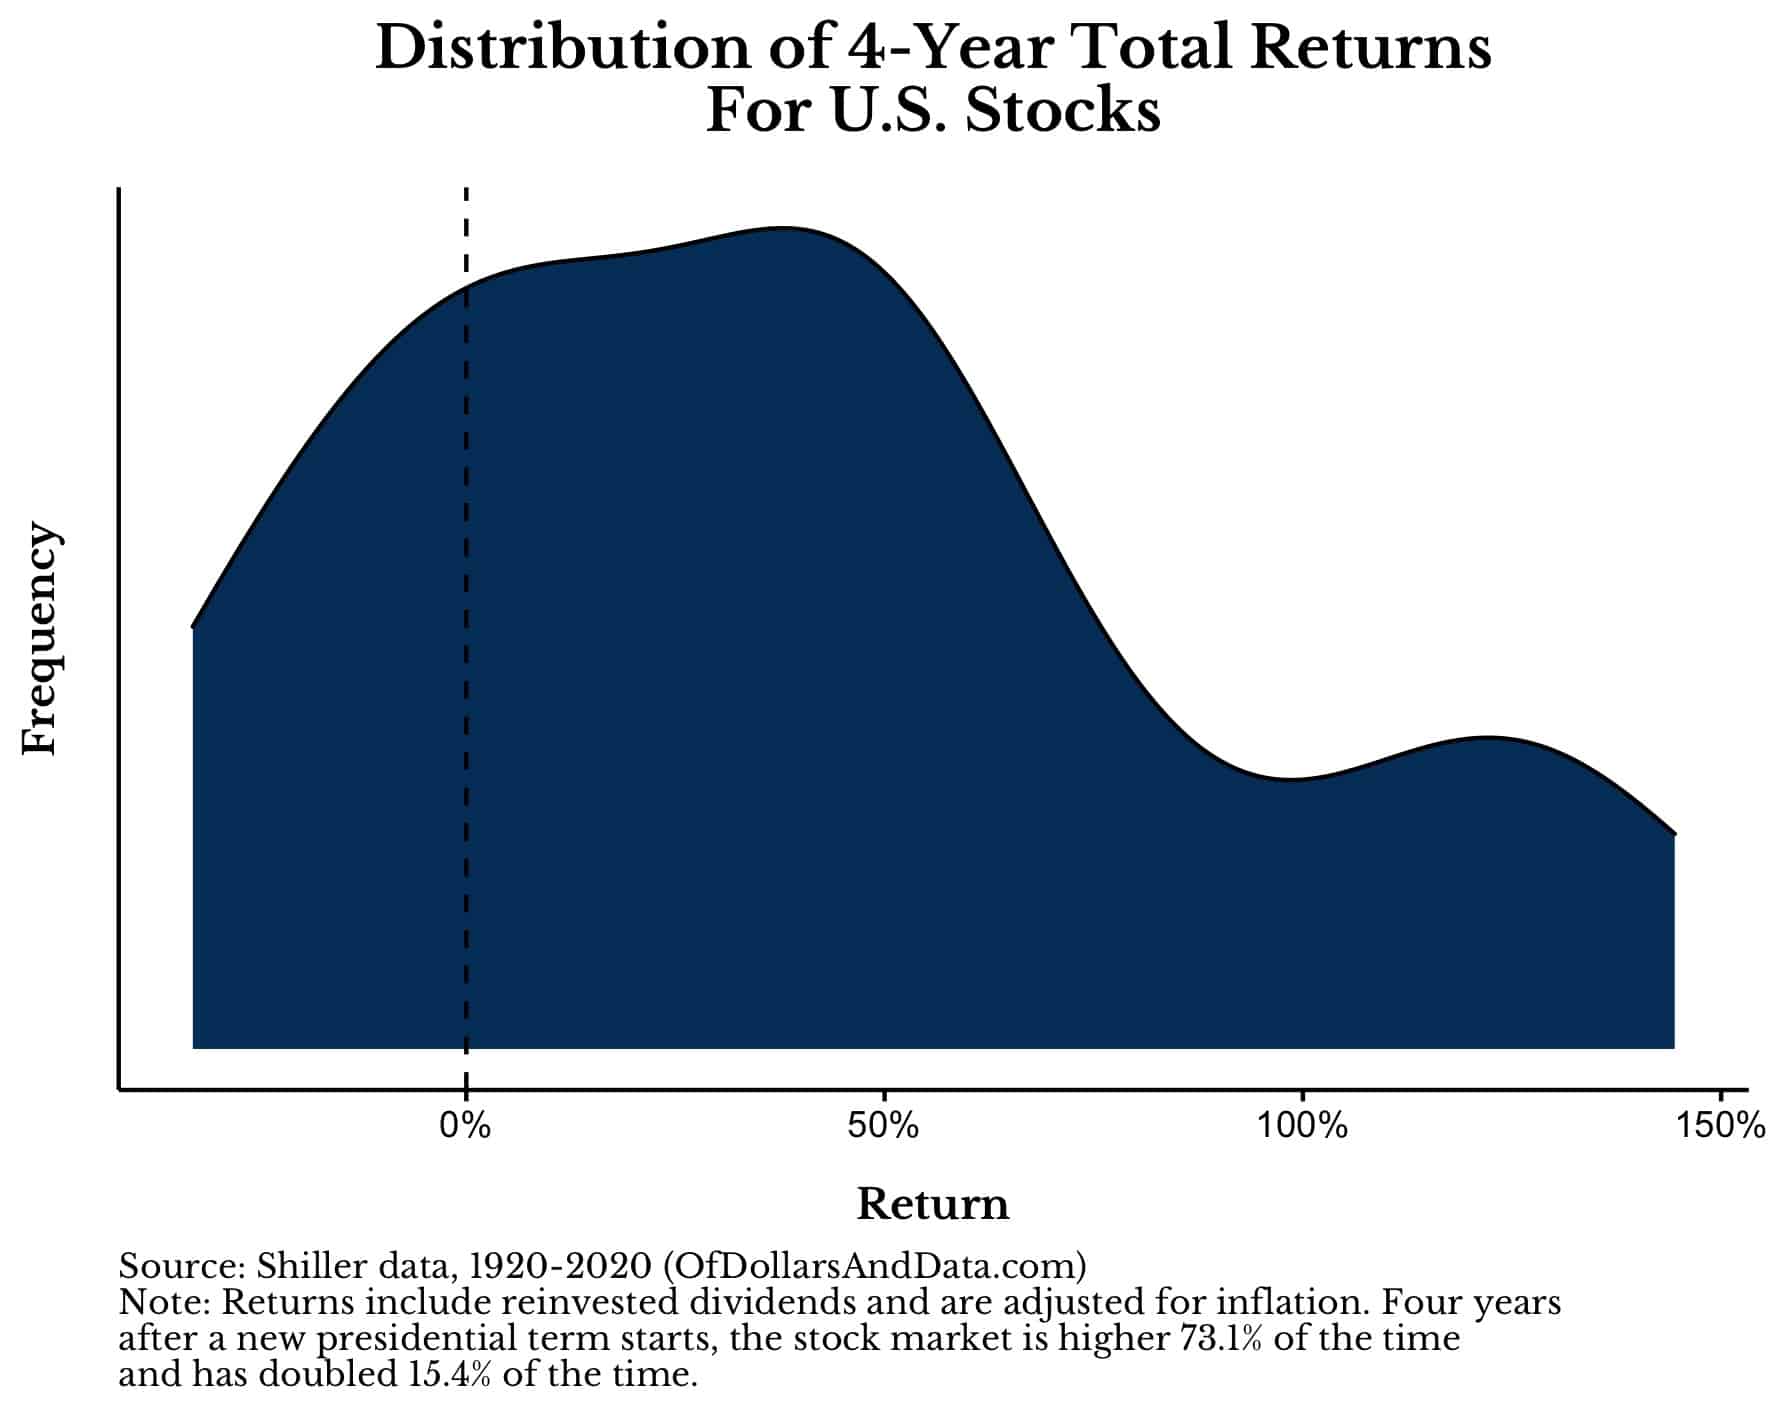 Chart showing distribution of 4-year total returns for US stocks since 1920.